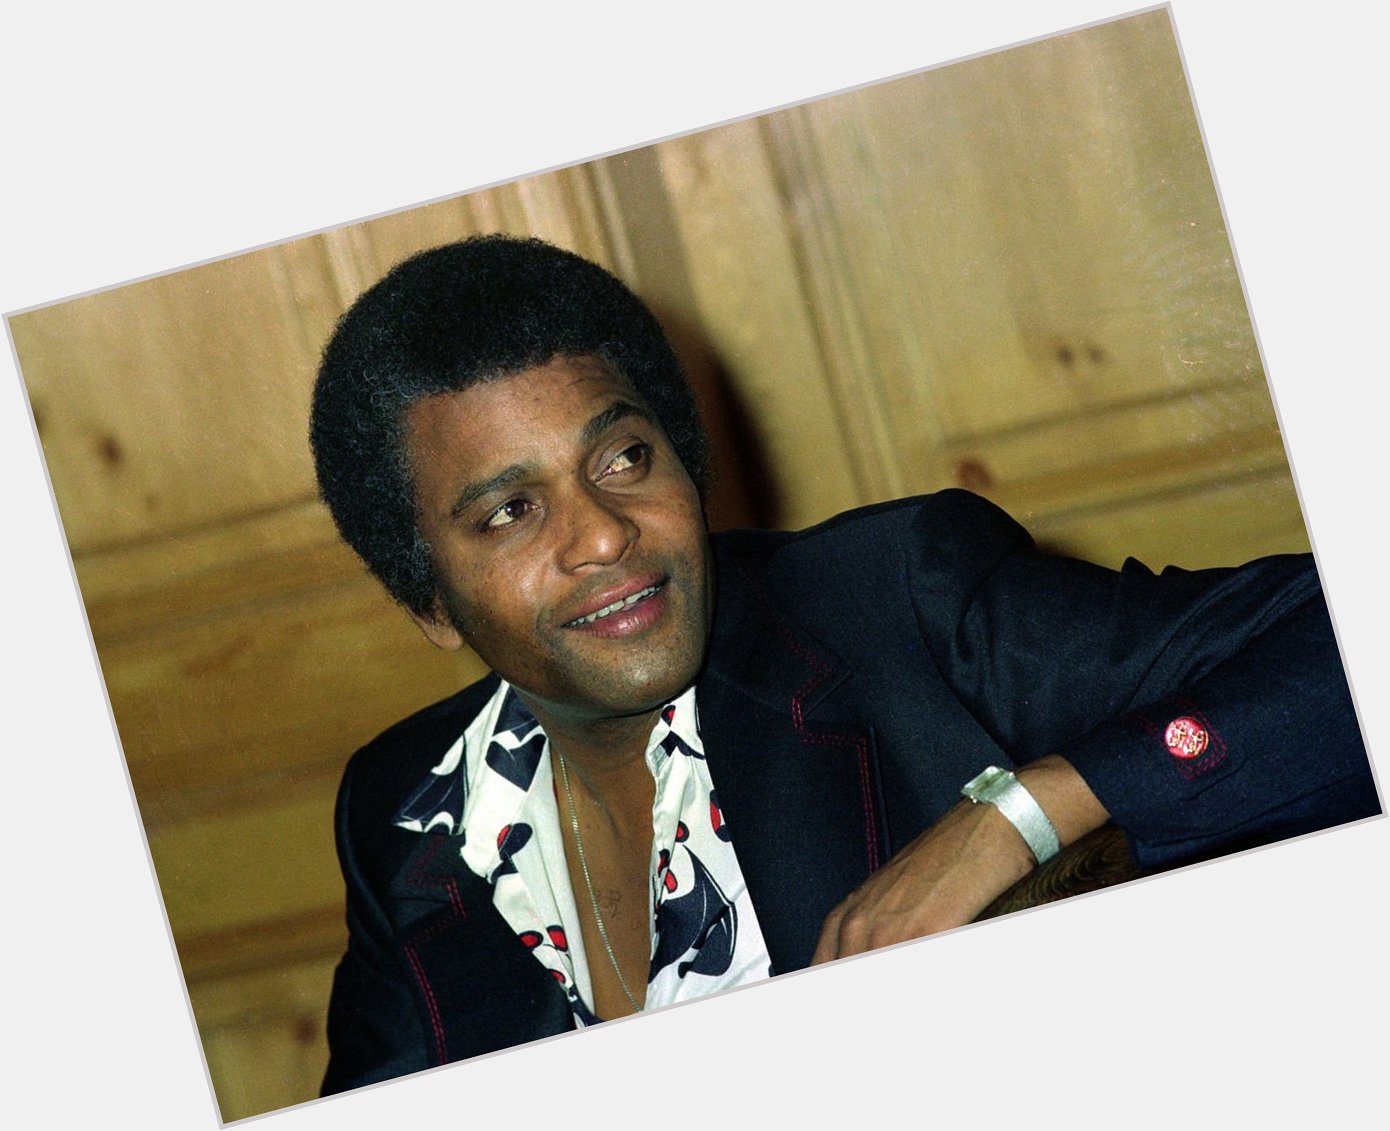 Happy Birthday to Charley Pride from all of us at DoYouRemember! 
Favorite Charley Pride song?  